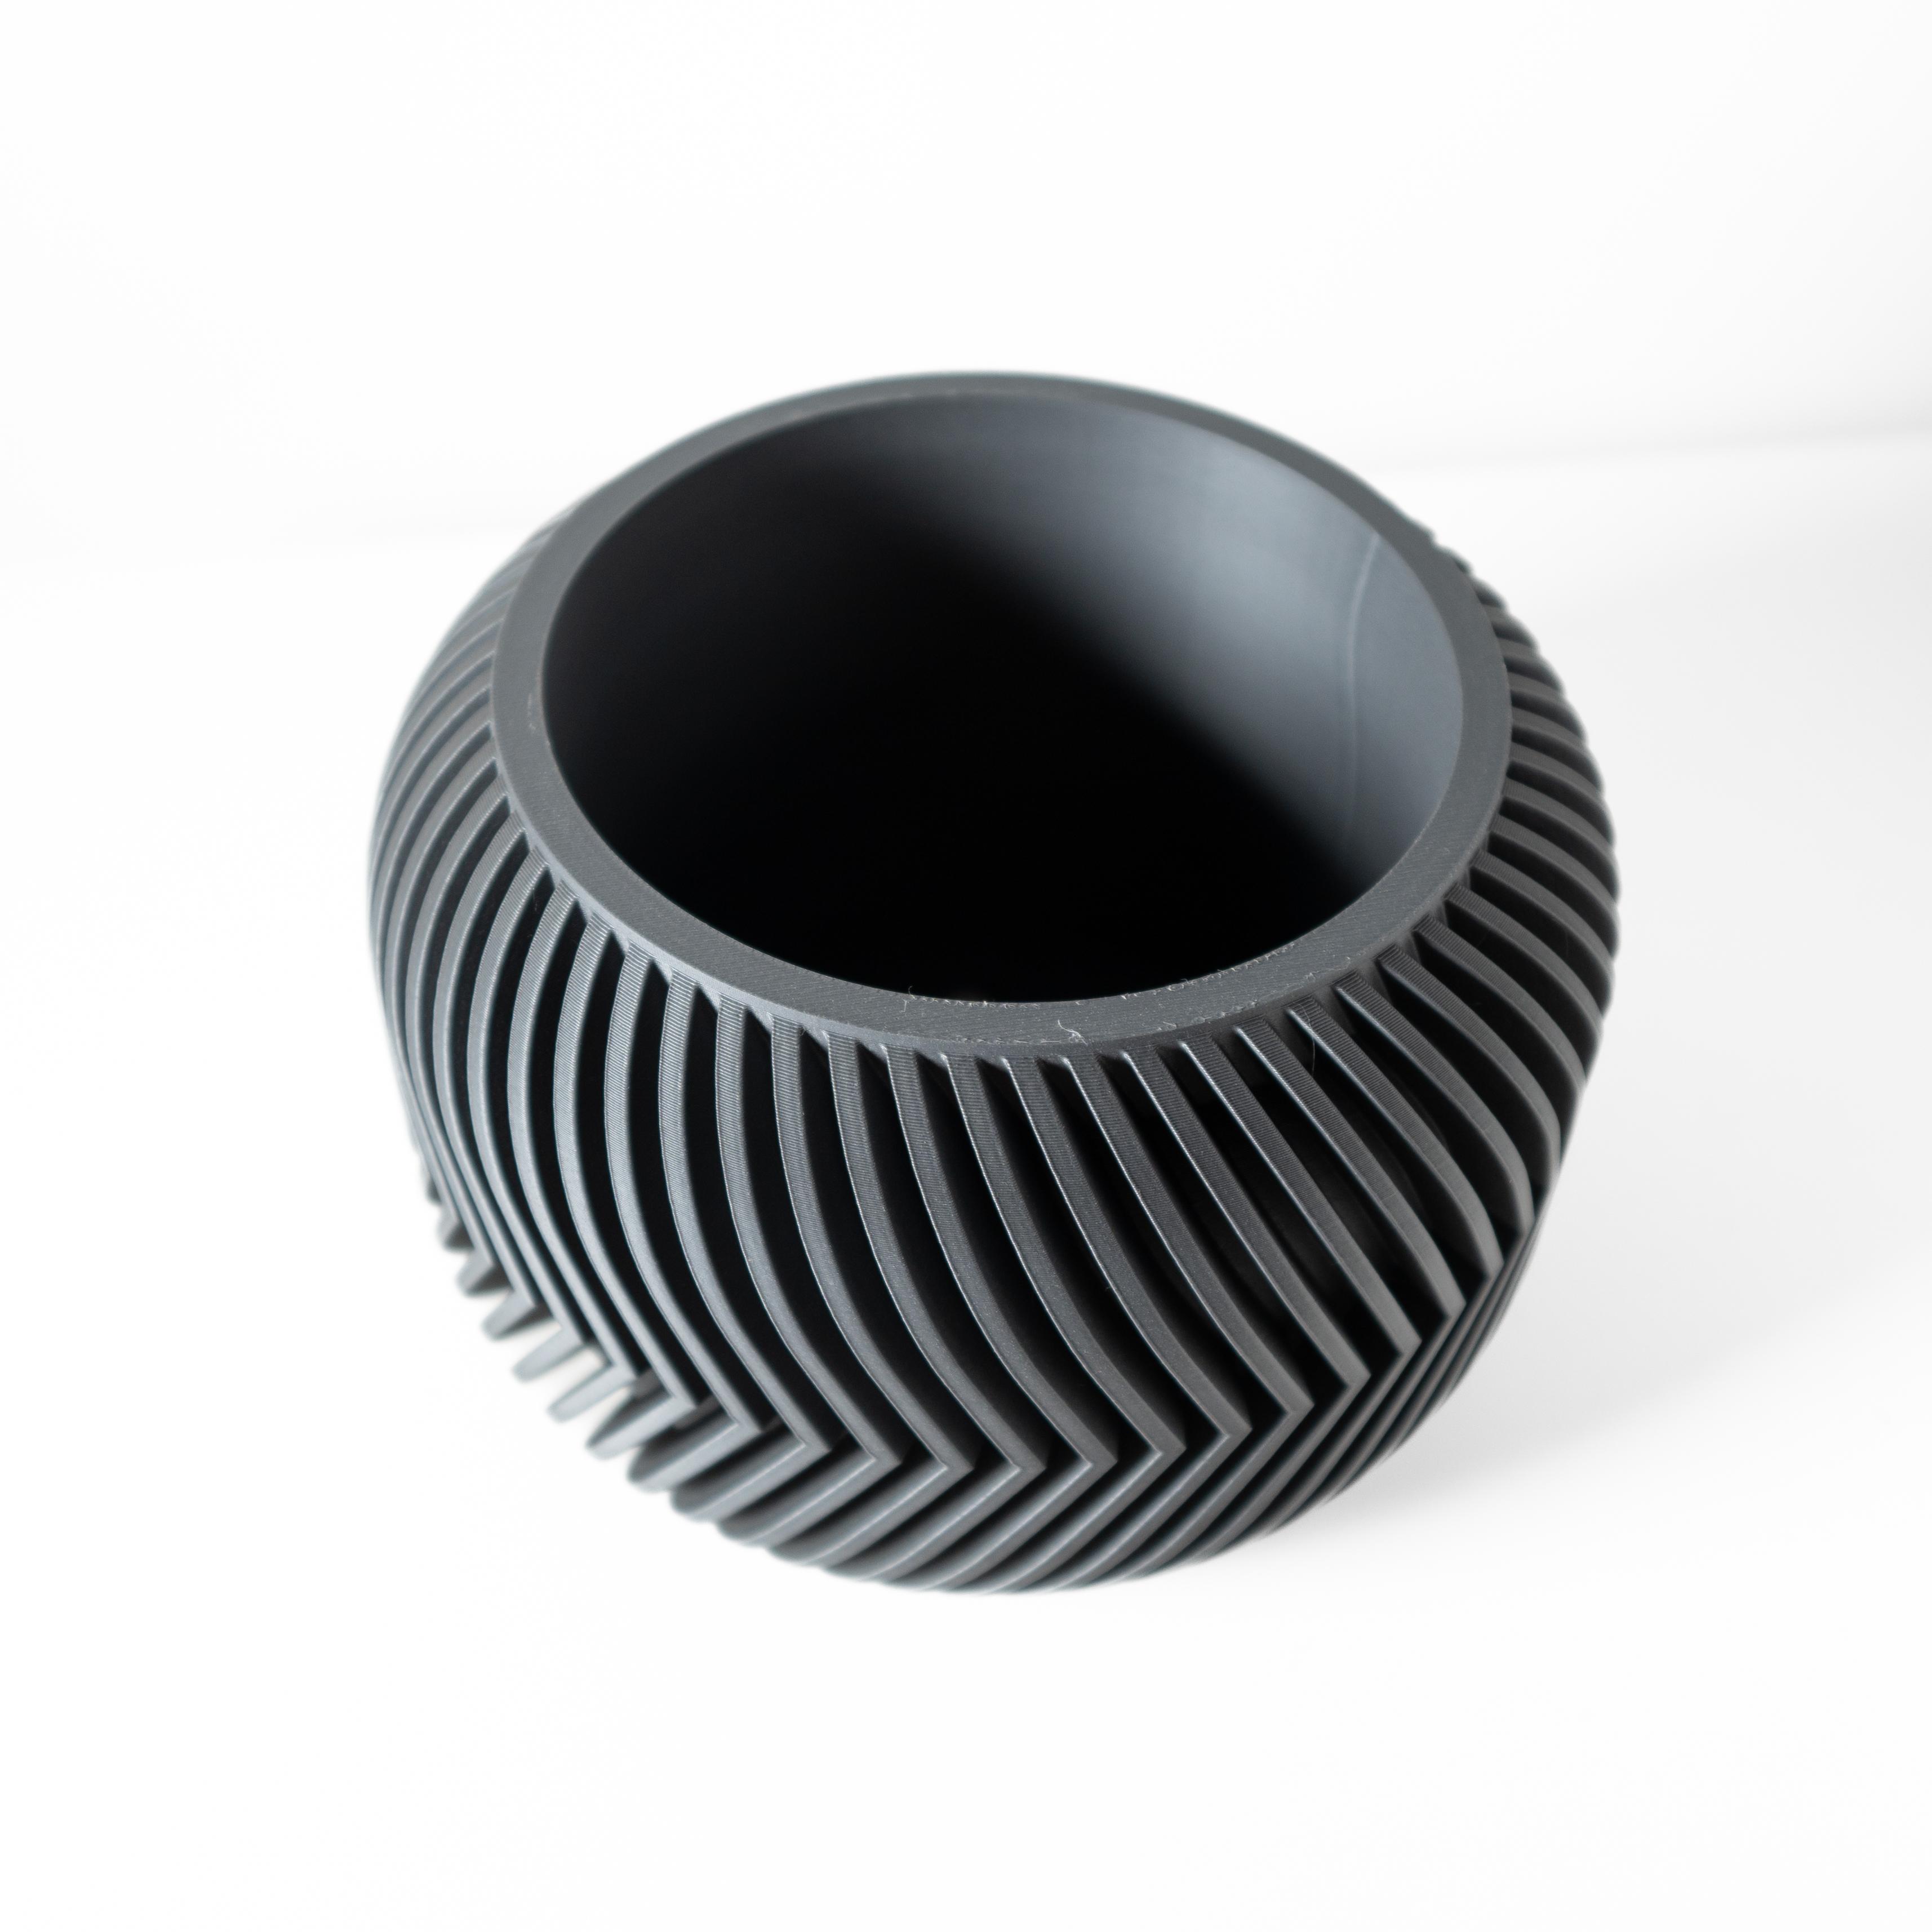 The Ervon Planter Pot with Drainage Tray & Stand: Modern and Unique Home Decor for Plants 3d model